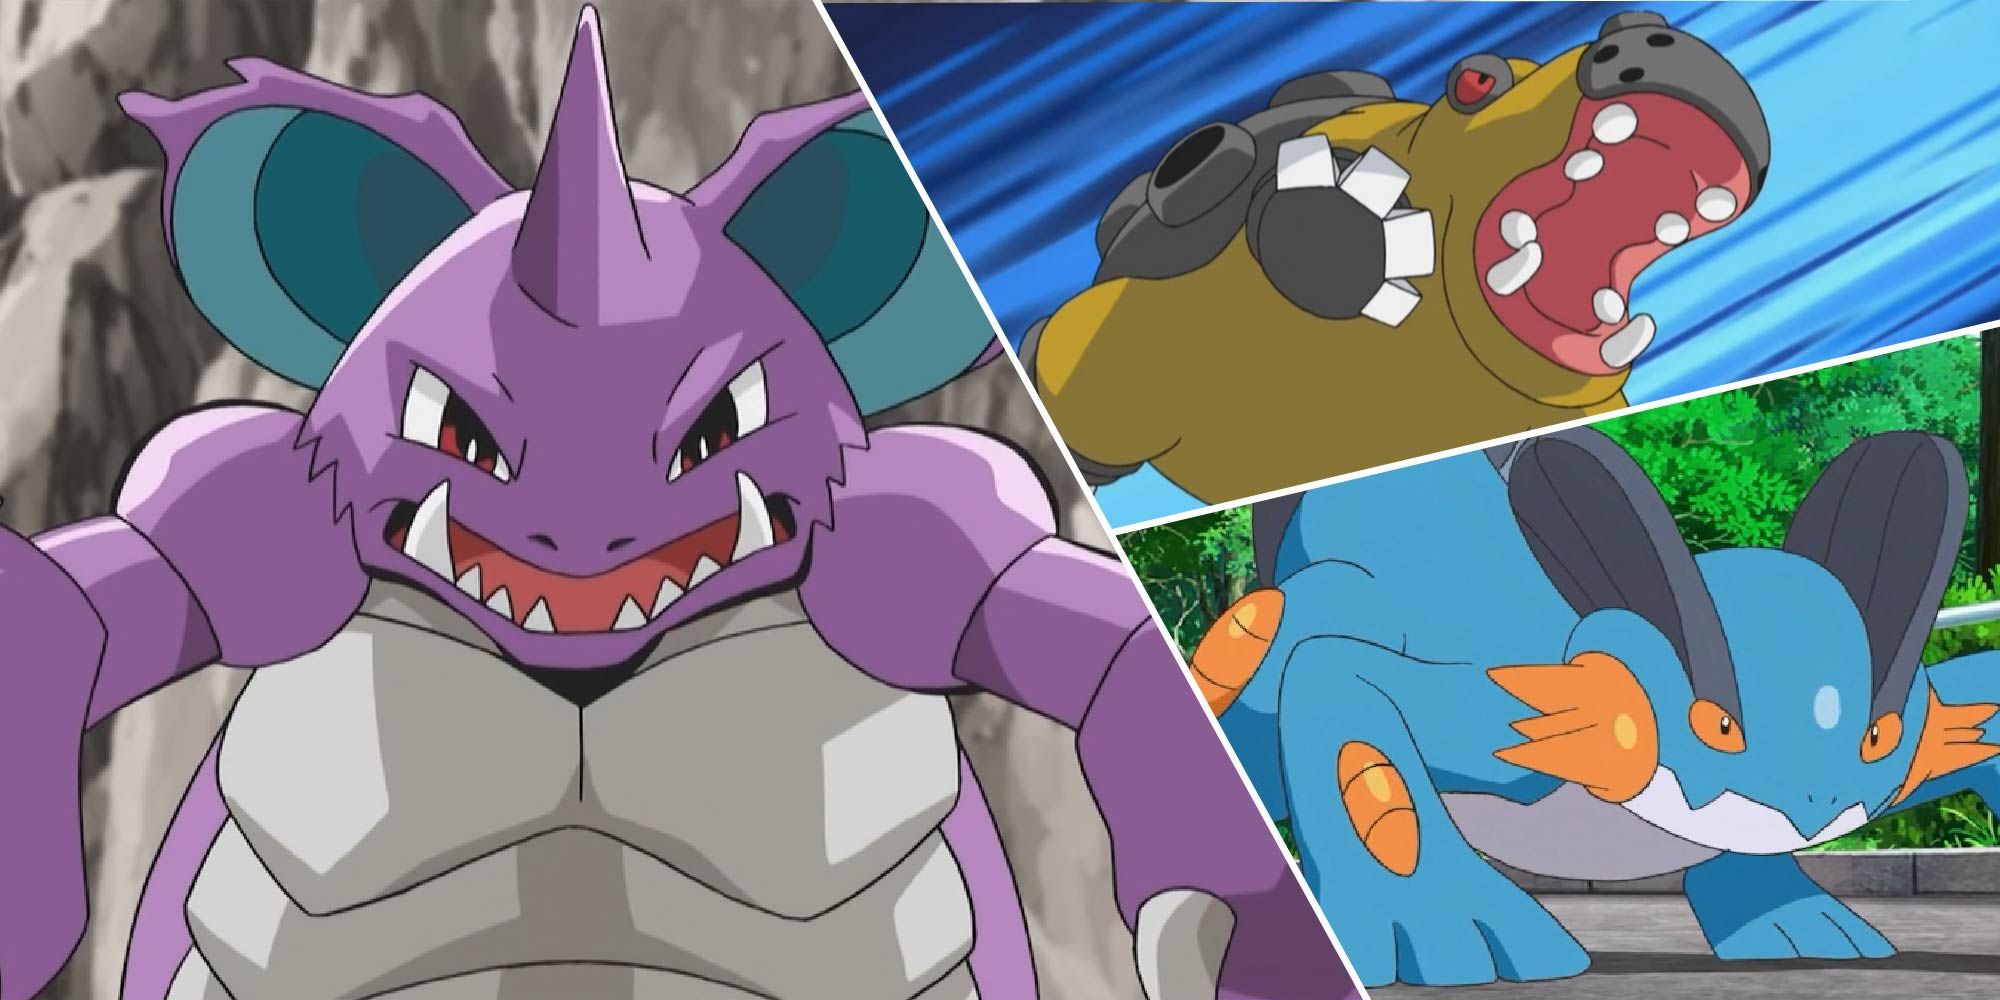 A split image featuring Nidoking (left), Hippowdon (top right), and Swampert (bottom right).